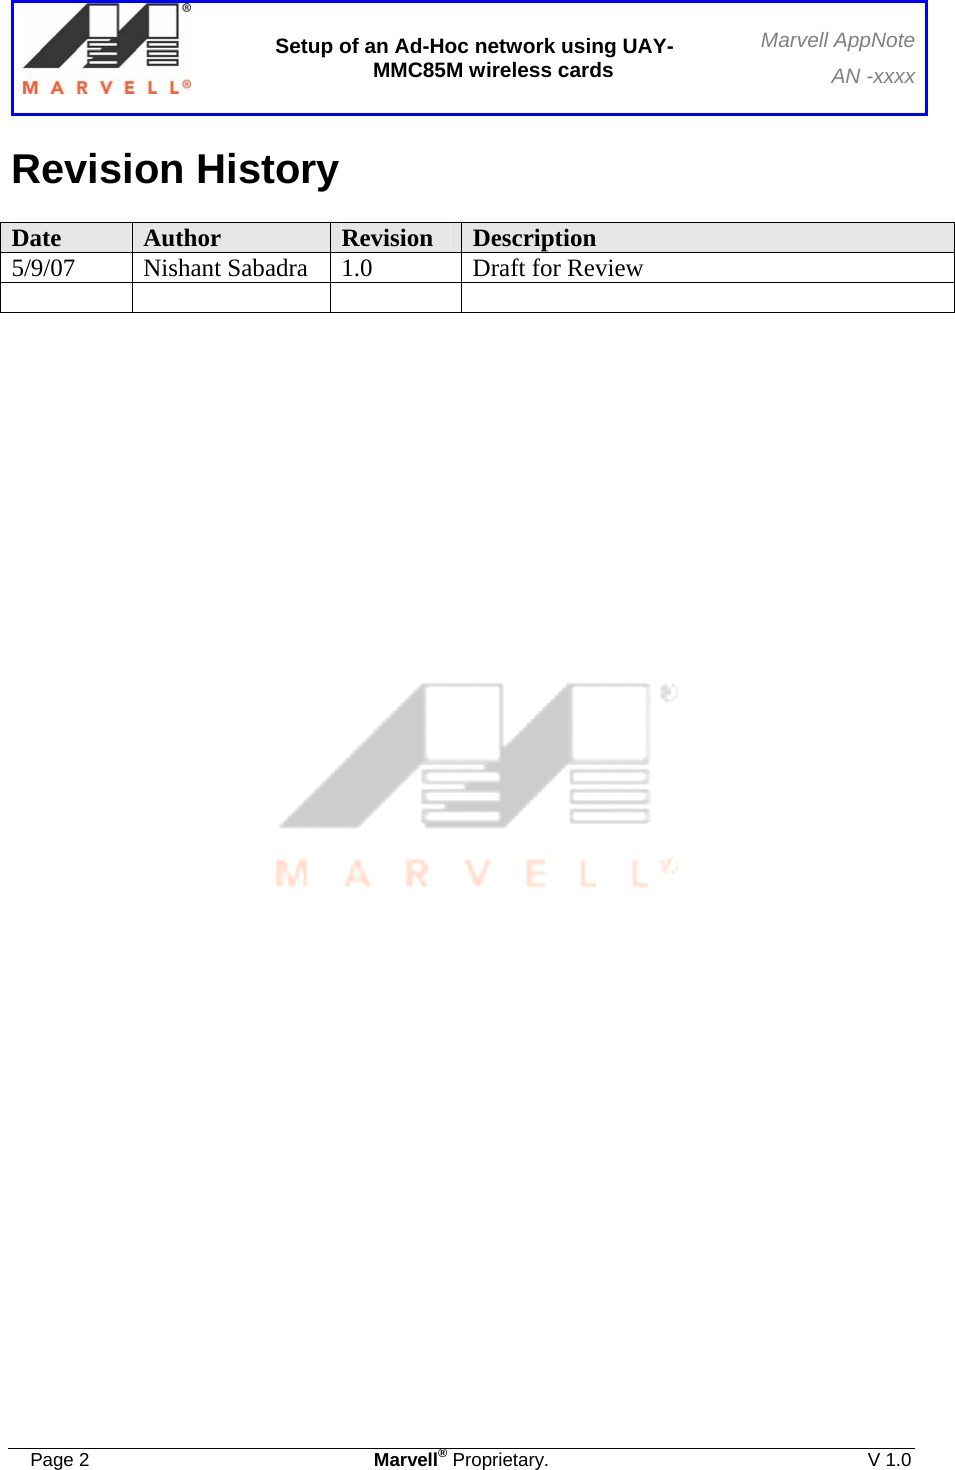  Setup of an Ad-Hoc network using UAY-MMC85M wireless cards Marvell AppNoteAN -xxxx  Page 2  Marvell® Proprietary.  V 1.0  Revision History  Date  Author  Revision  Description 5/9/07  Nishant Sabadra  1.0  Draft for Review       